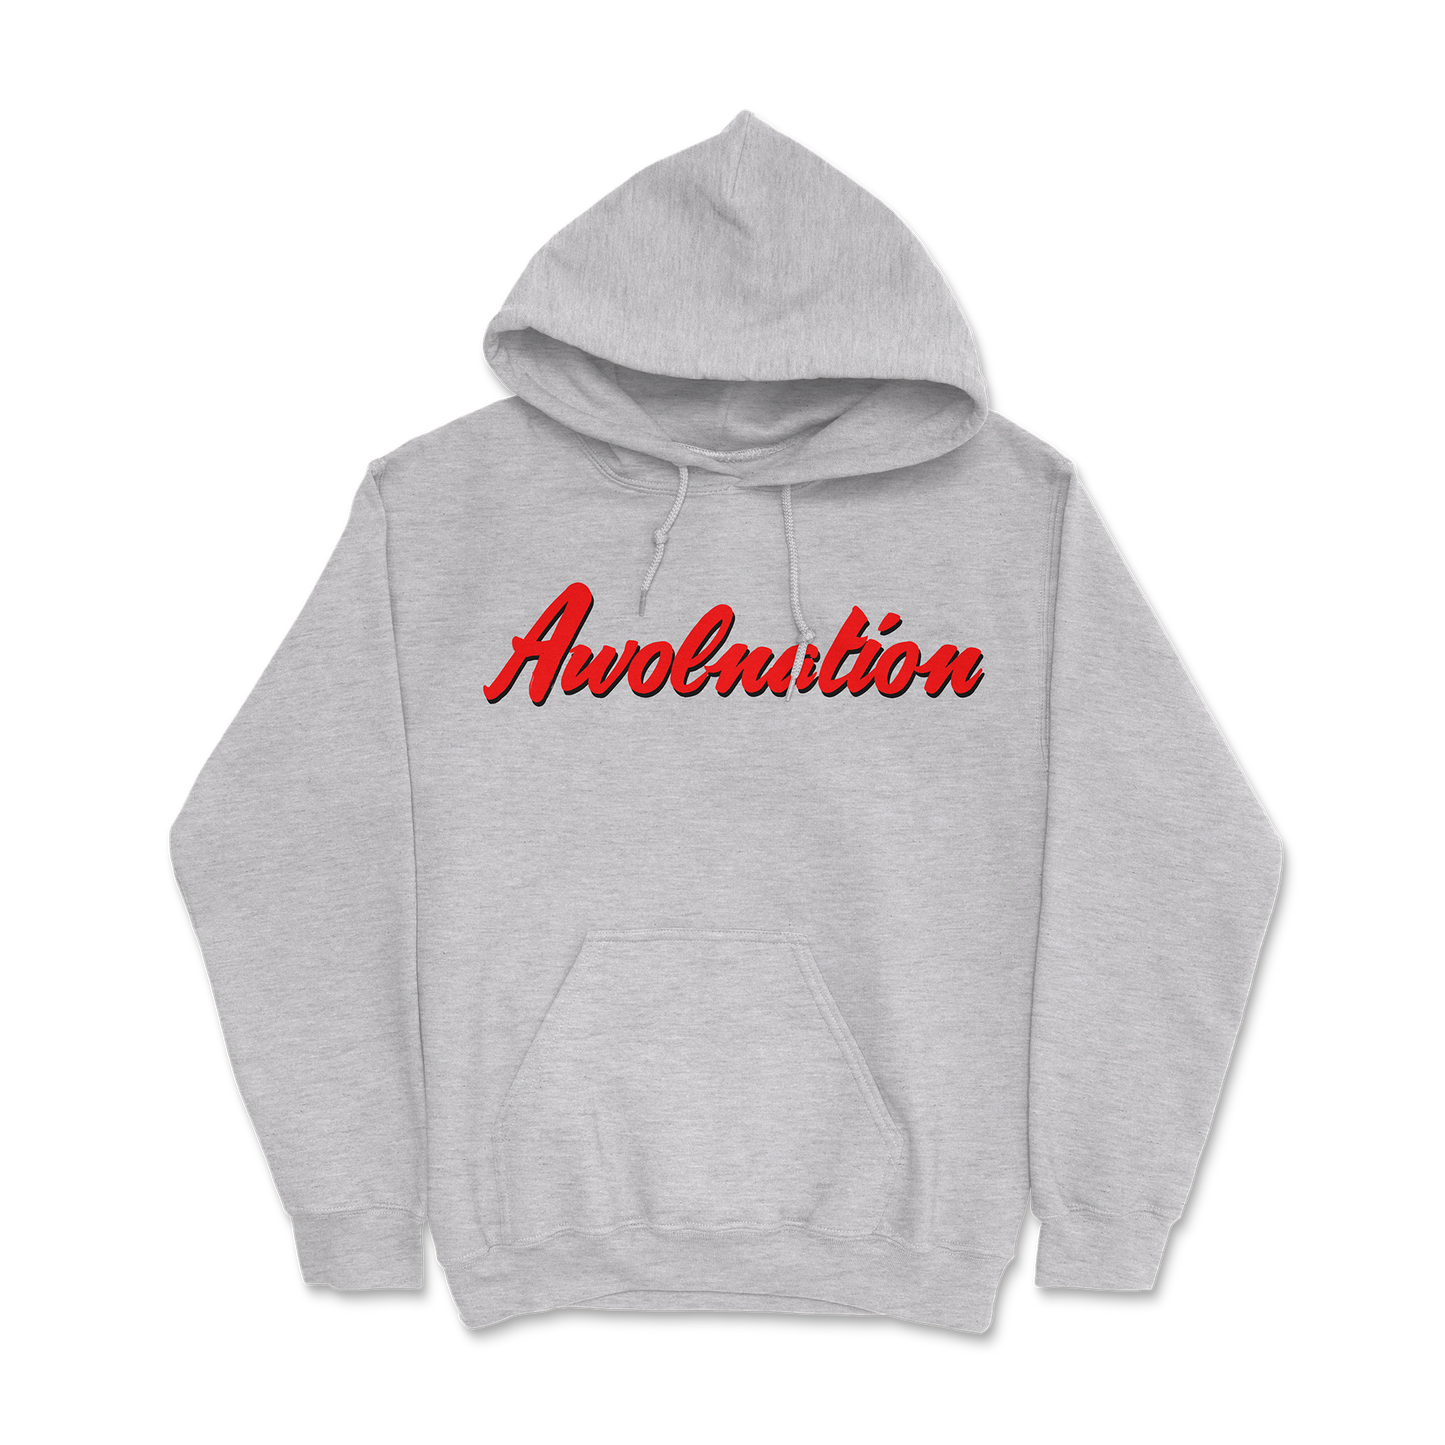 AWOLNATION Red Logo on Gray Hoodie